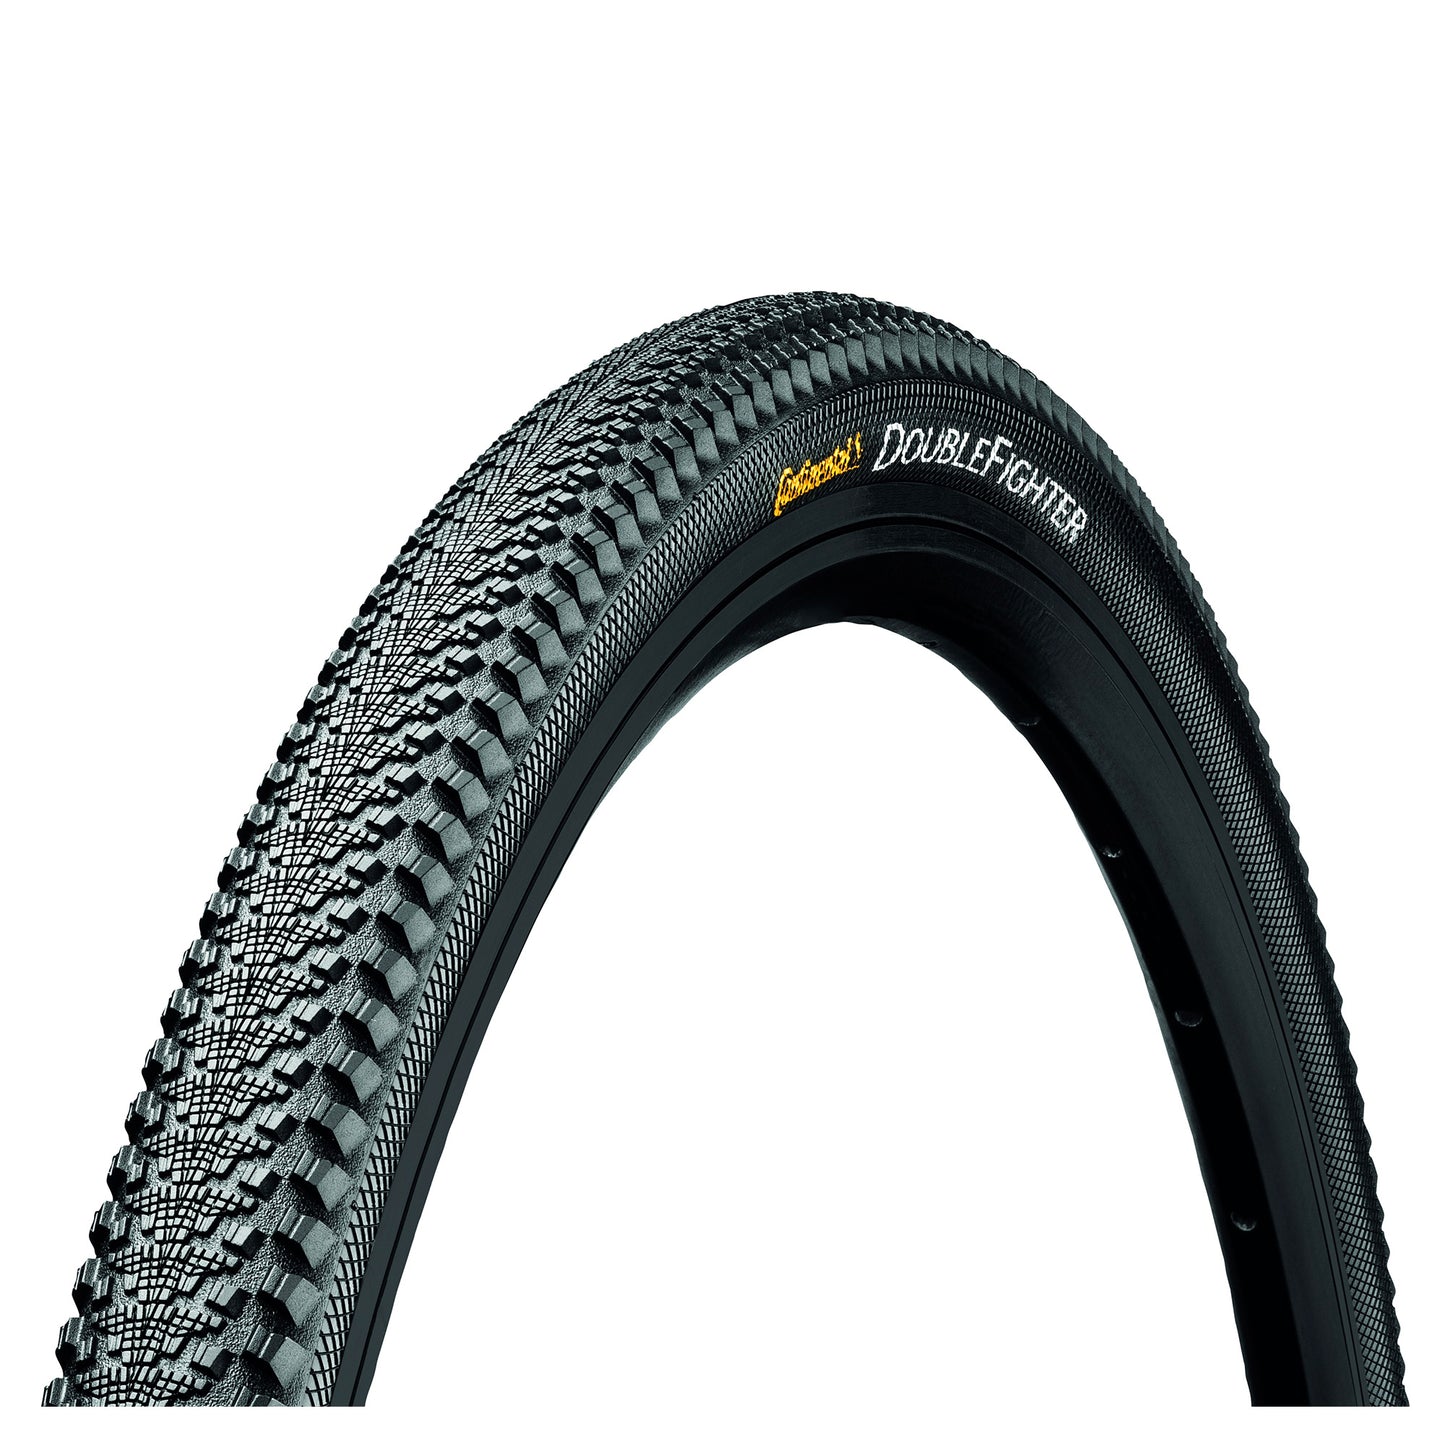 CONTINENTAL DOUBLEFIGHTER III TYRE - WIRE BEAD